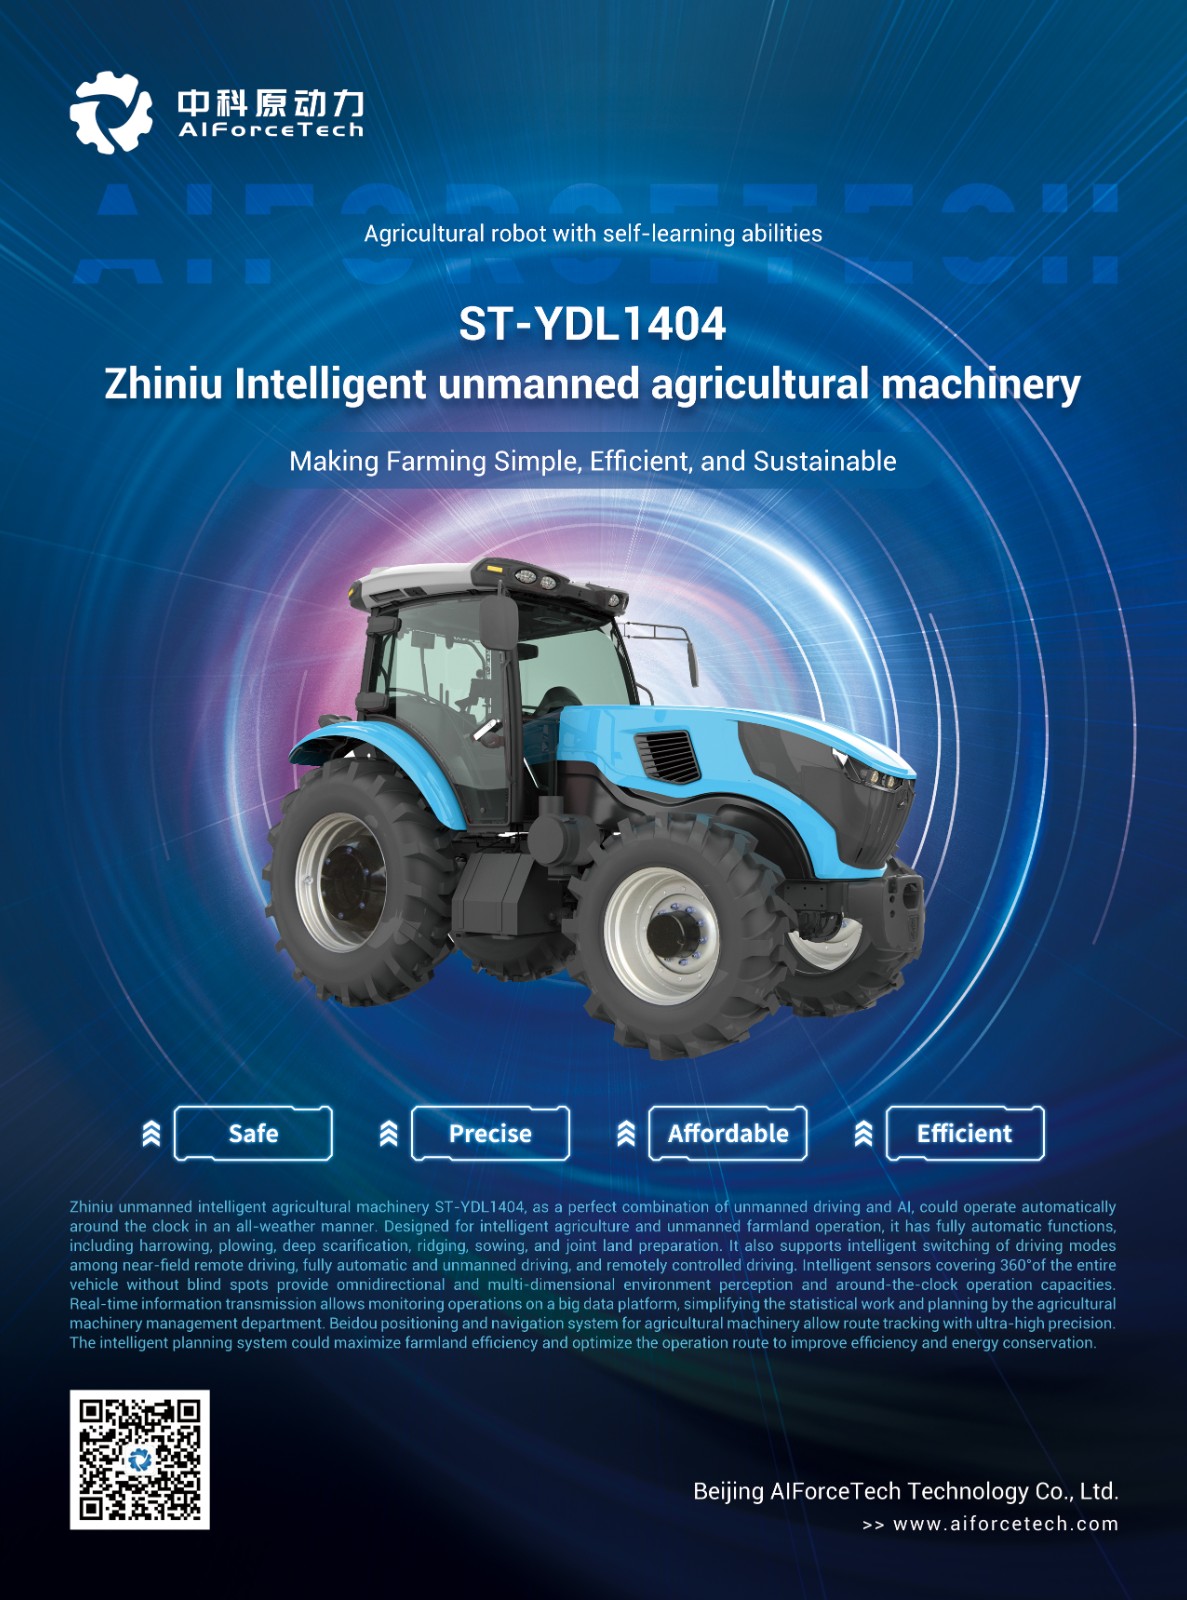 ST-YDL 1404 Zhiniu Intelligent unmanned agricultural machinery